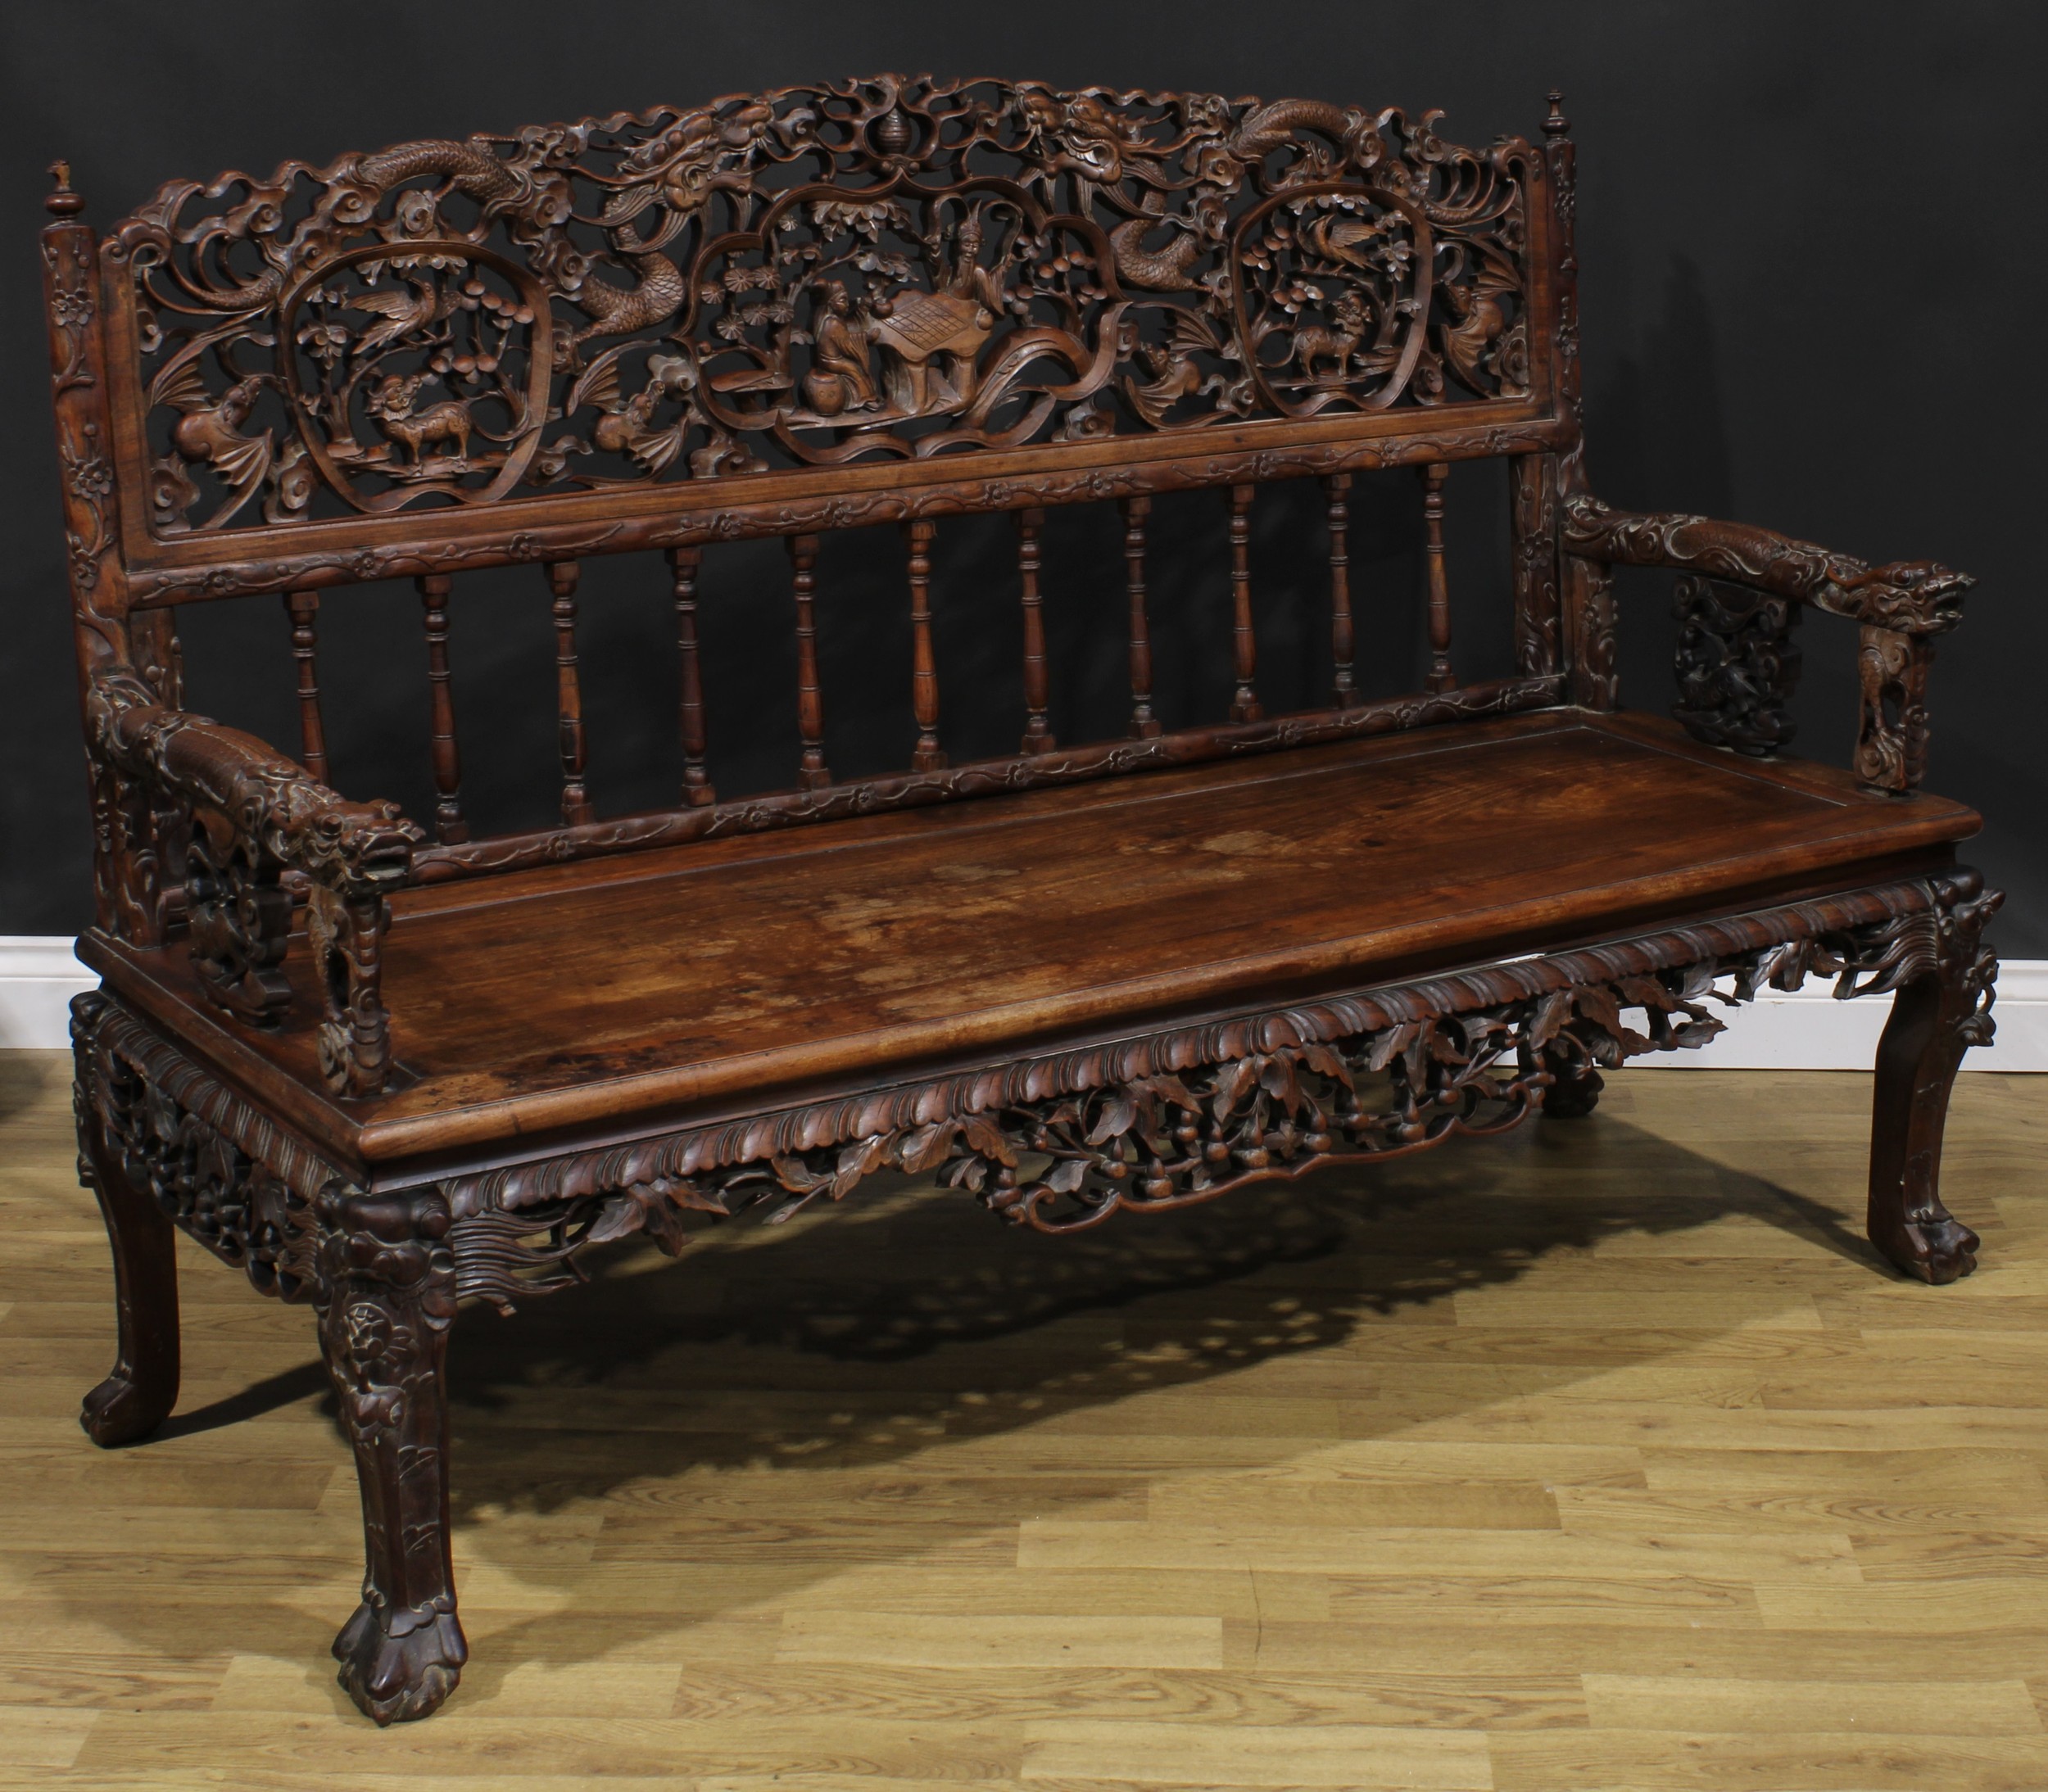 A Chinese hardwood bench or settle, arched cresting pierced and profusely carved with dragons, - Image 2 of 4